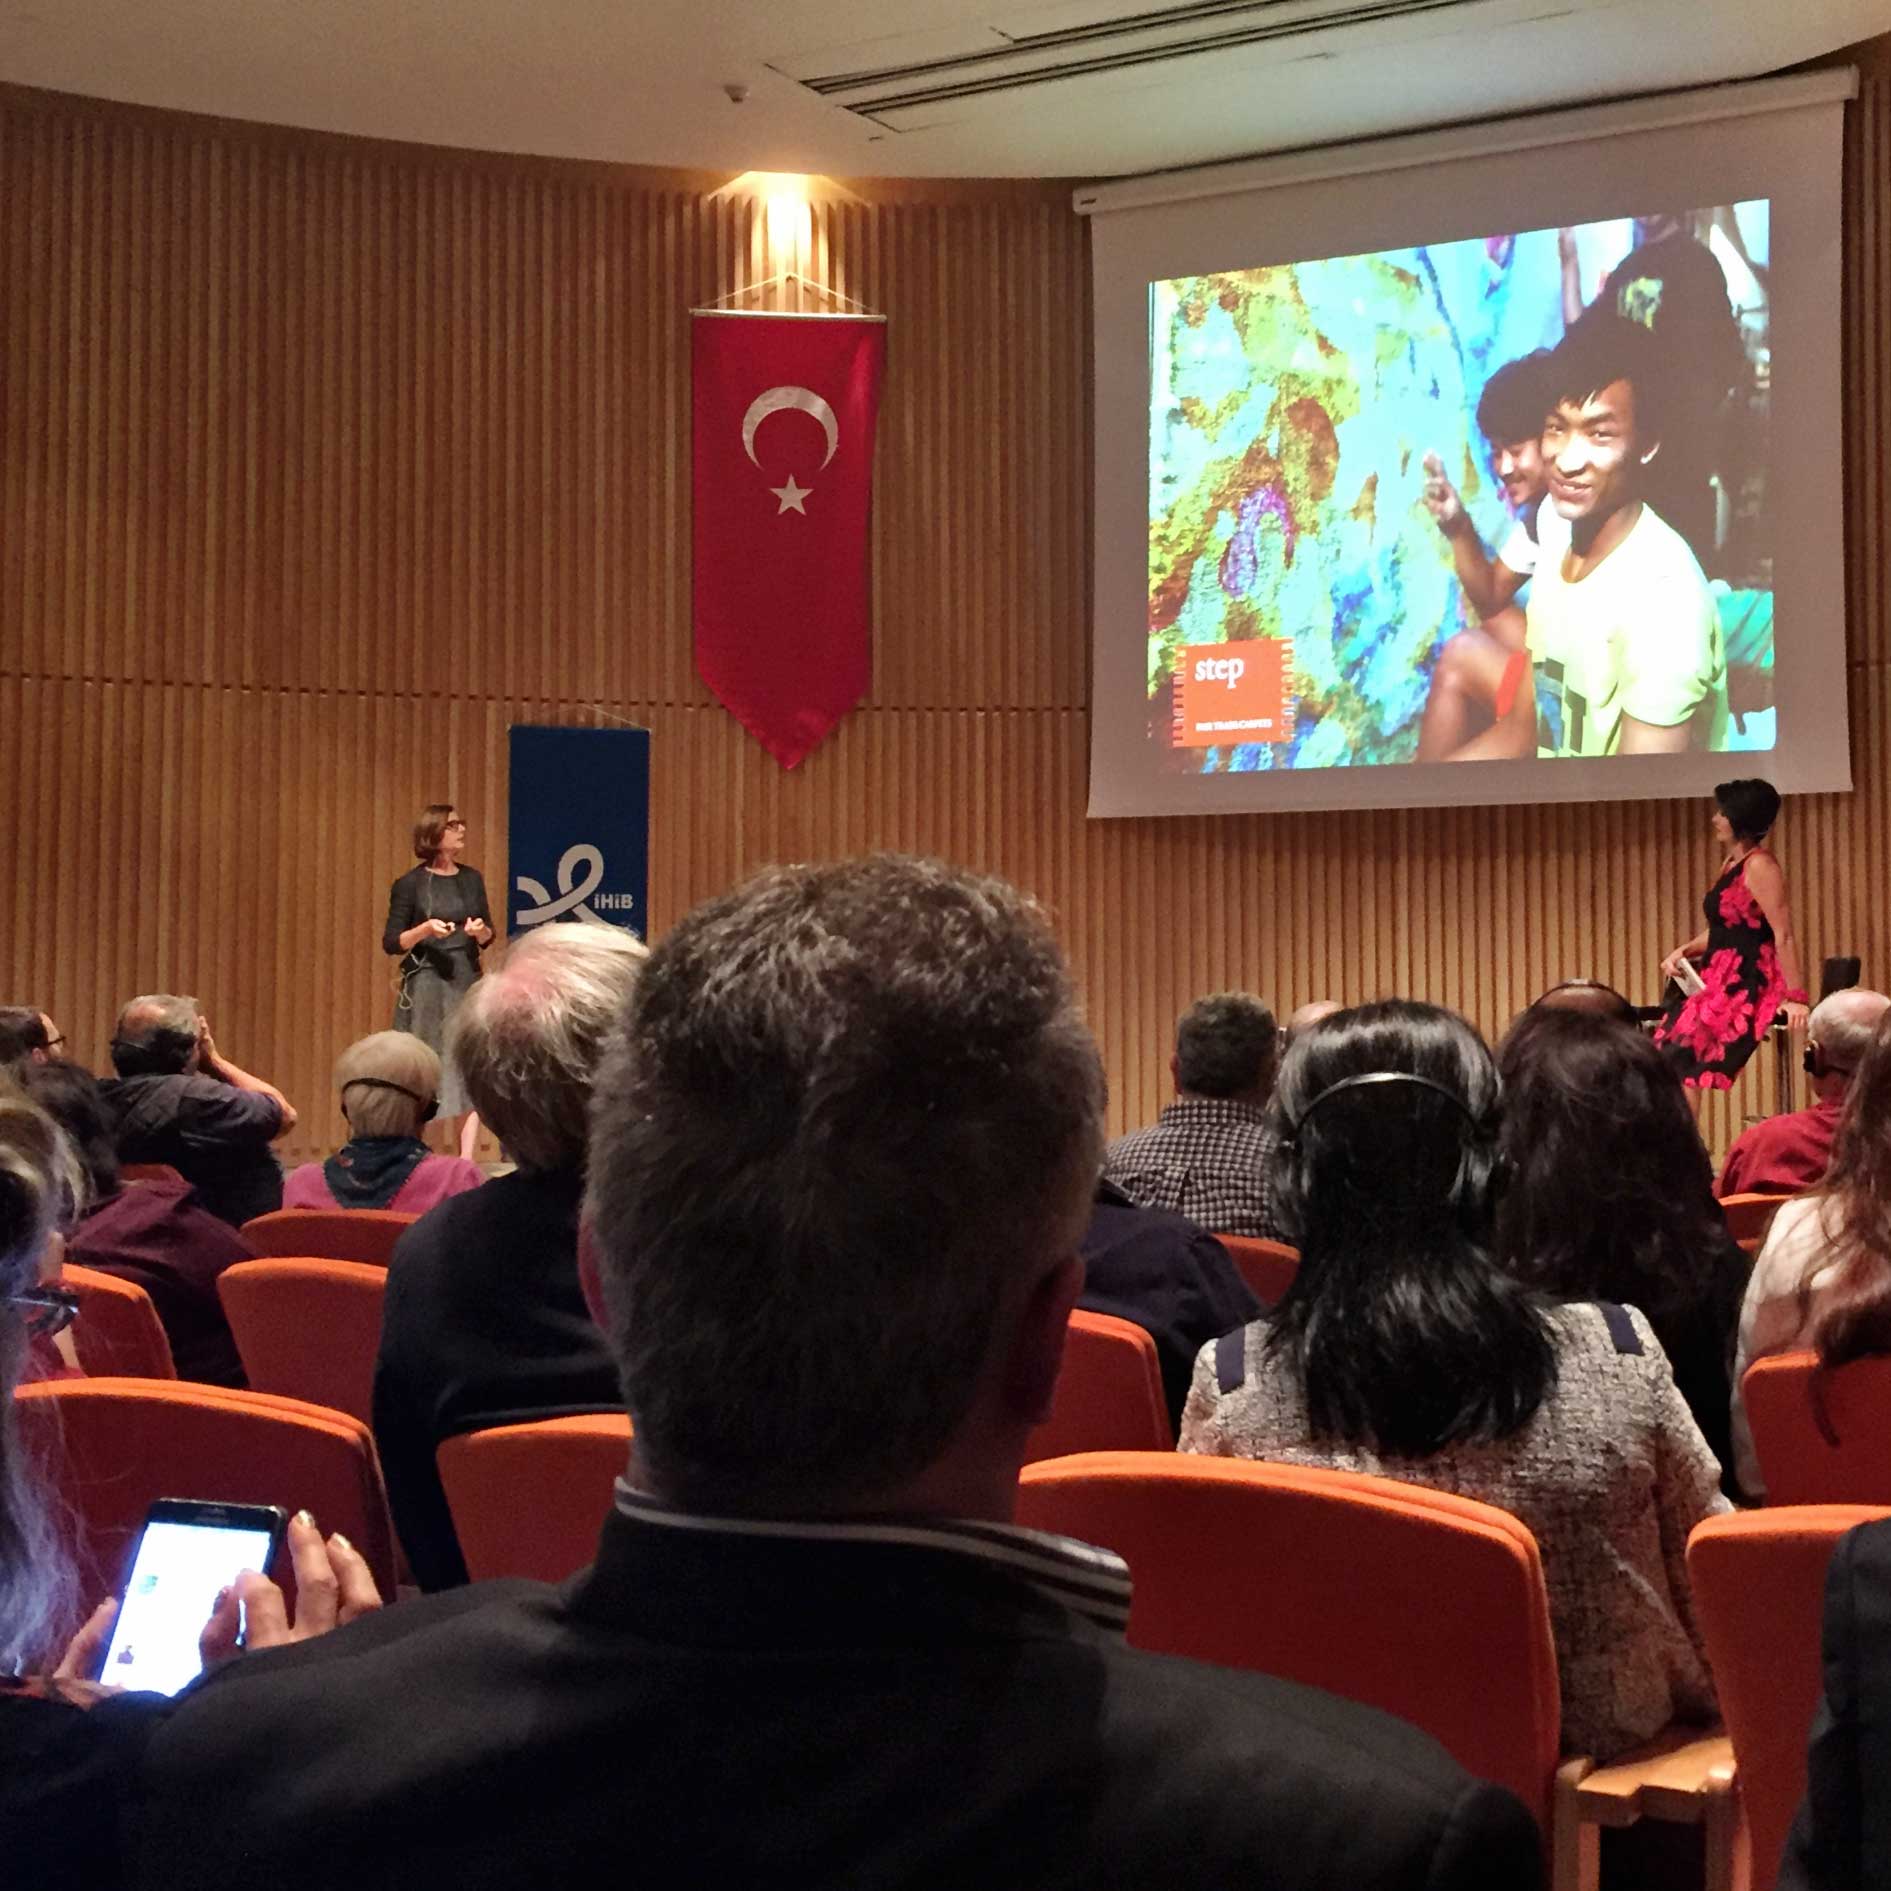 Carol Sebert of Creative Matters is shown speaking about LabelSTEP during her presentation 'Contemporary Carpet Design' during the Istanbul International Carpet Conference, 6 October 2016. | Image courtesy of The Ruggist.